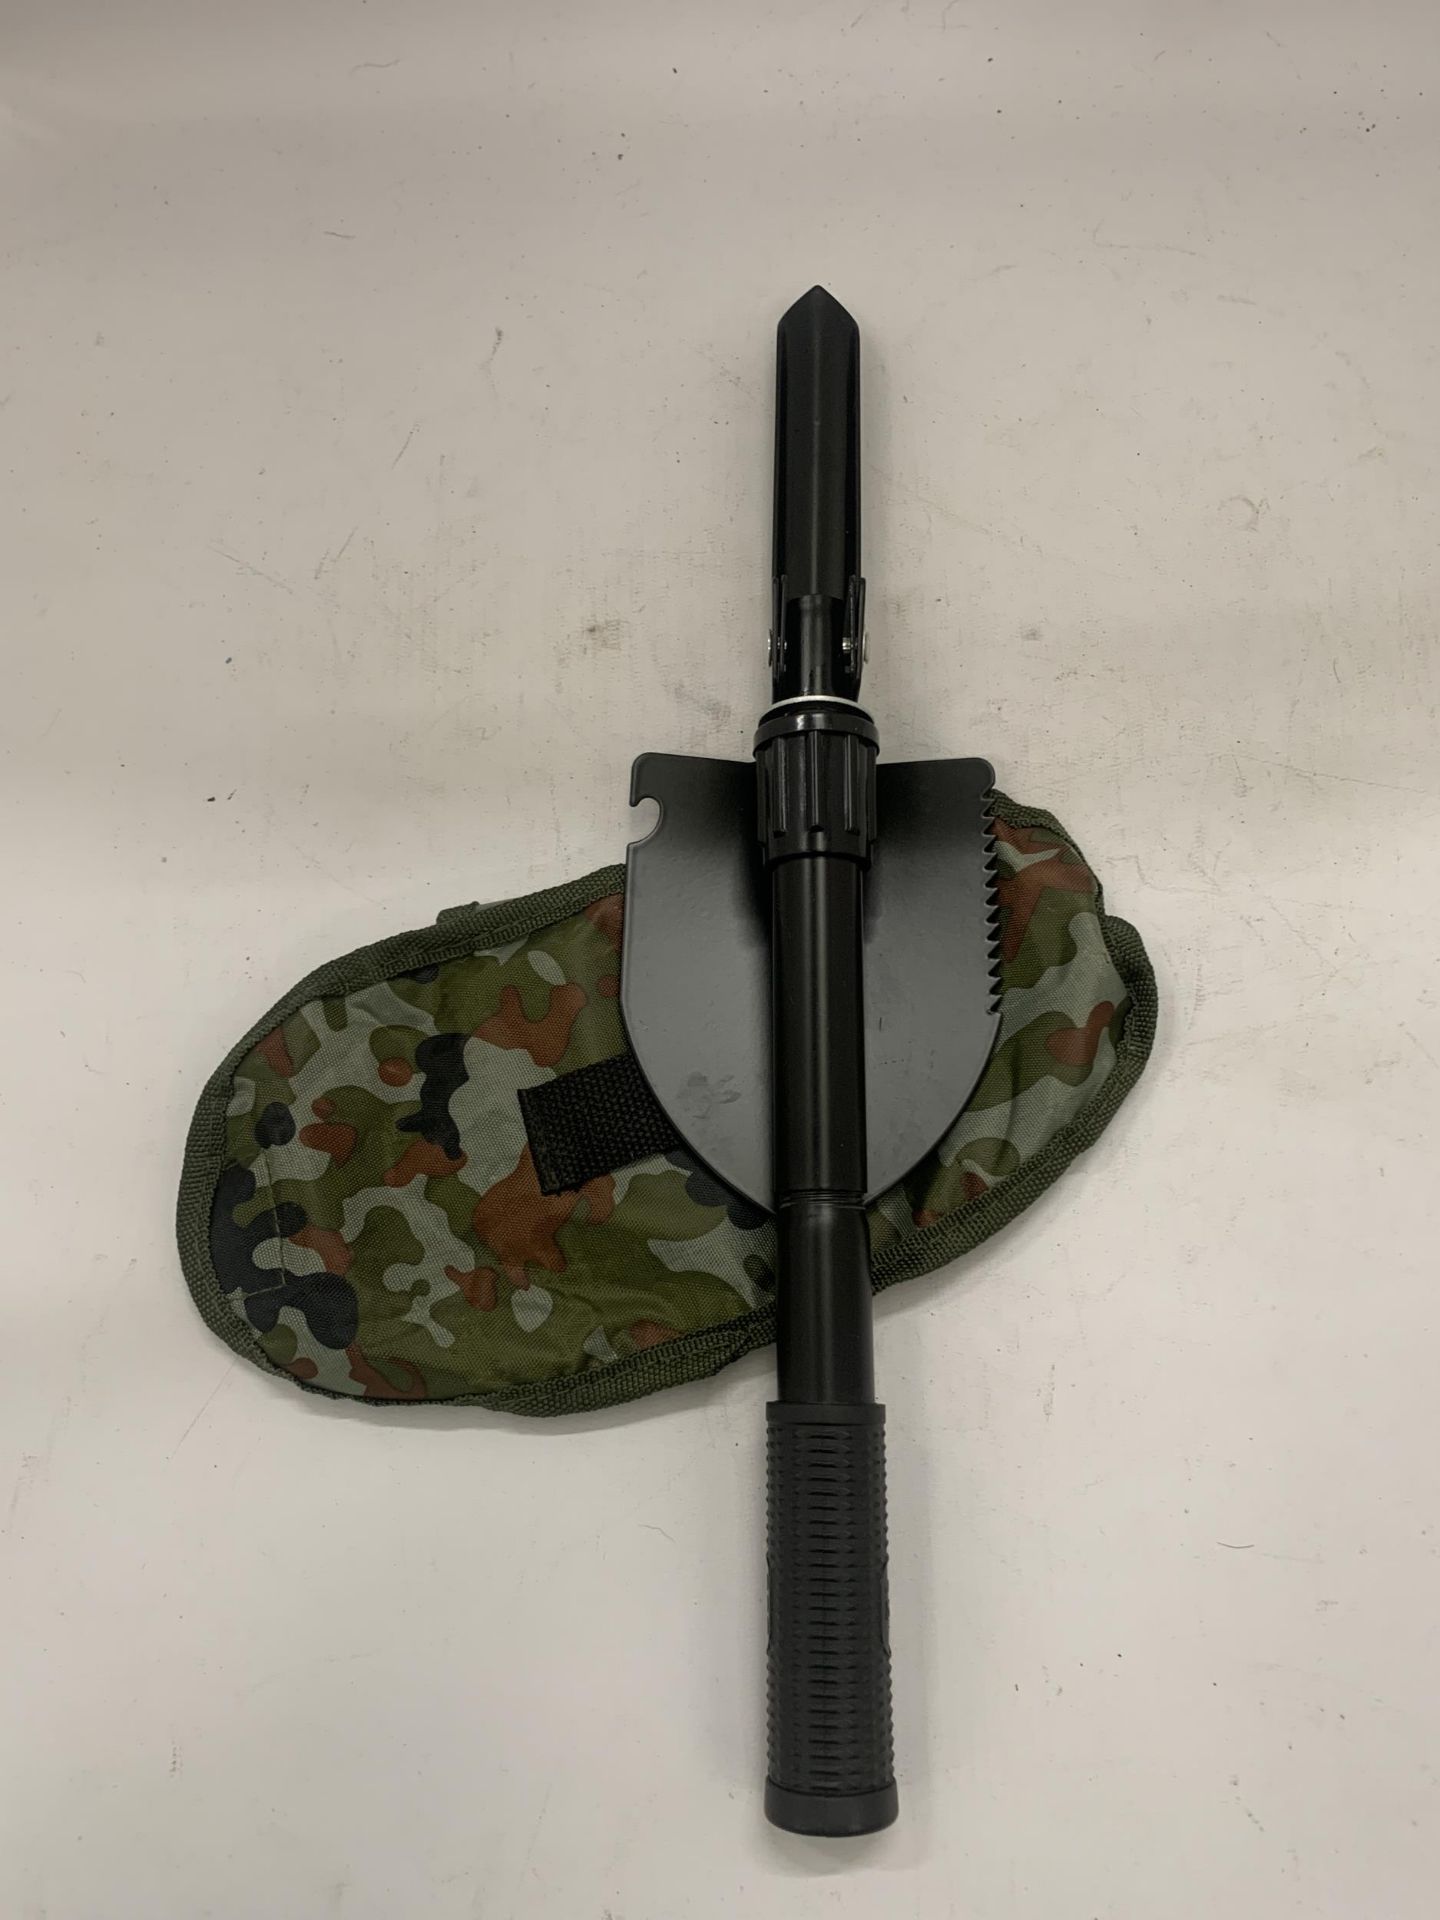 A MILITARY STYLE TRENCH SHOVEL IN A CASE